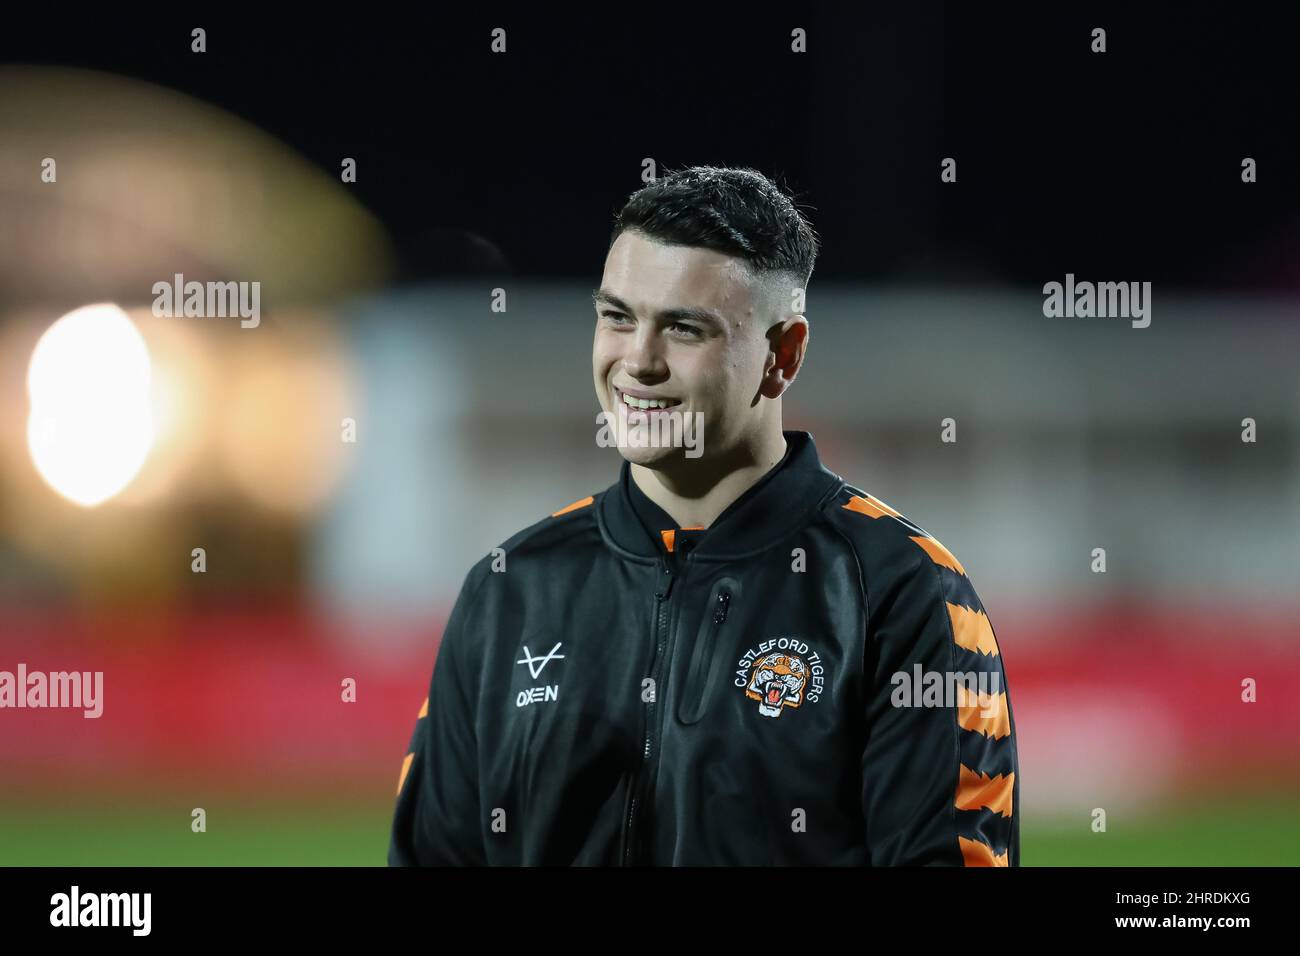 Kingston Upon Hull, UK. 25th Feb, 2022. Cain Robb #32 of Castleford Tigers arrives at Sewell Group Craven Park Stadium ahead of tonight's game in Kingston upon Hull, United Kingdom on 2/25/2022. (Photo by James Heaton/News Images/Sipa USA) Credit: Sipa USA/Alamy Live News Stock Photo